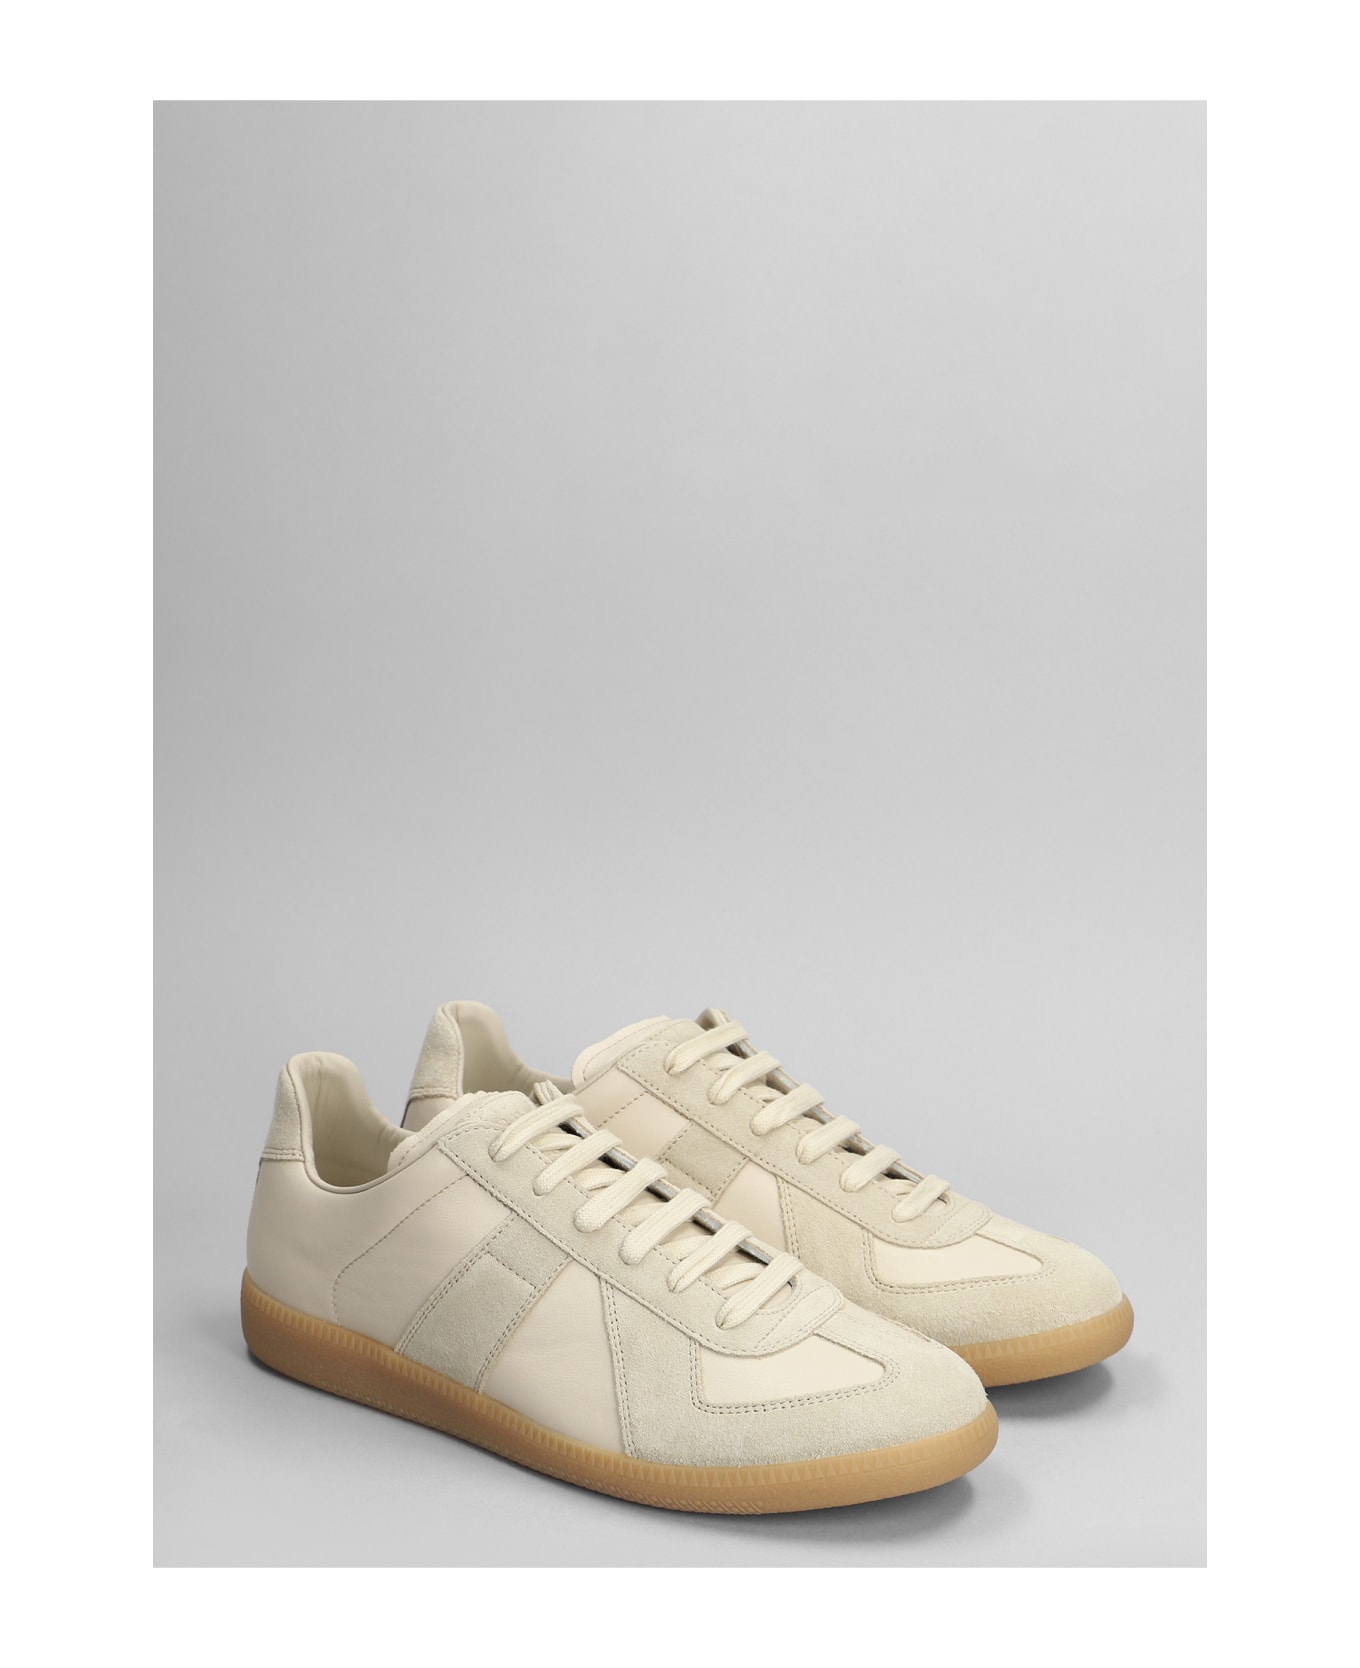 Maison Margiela Replica Sneakers In Beige Suede And Leather - beige スニーカー